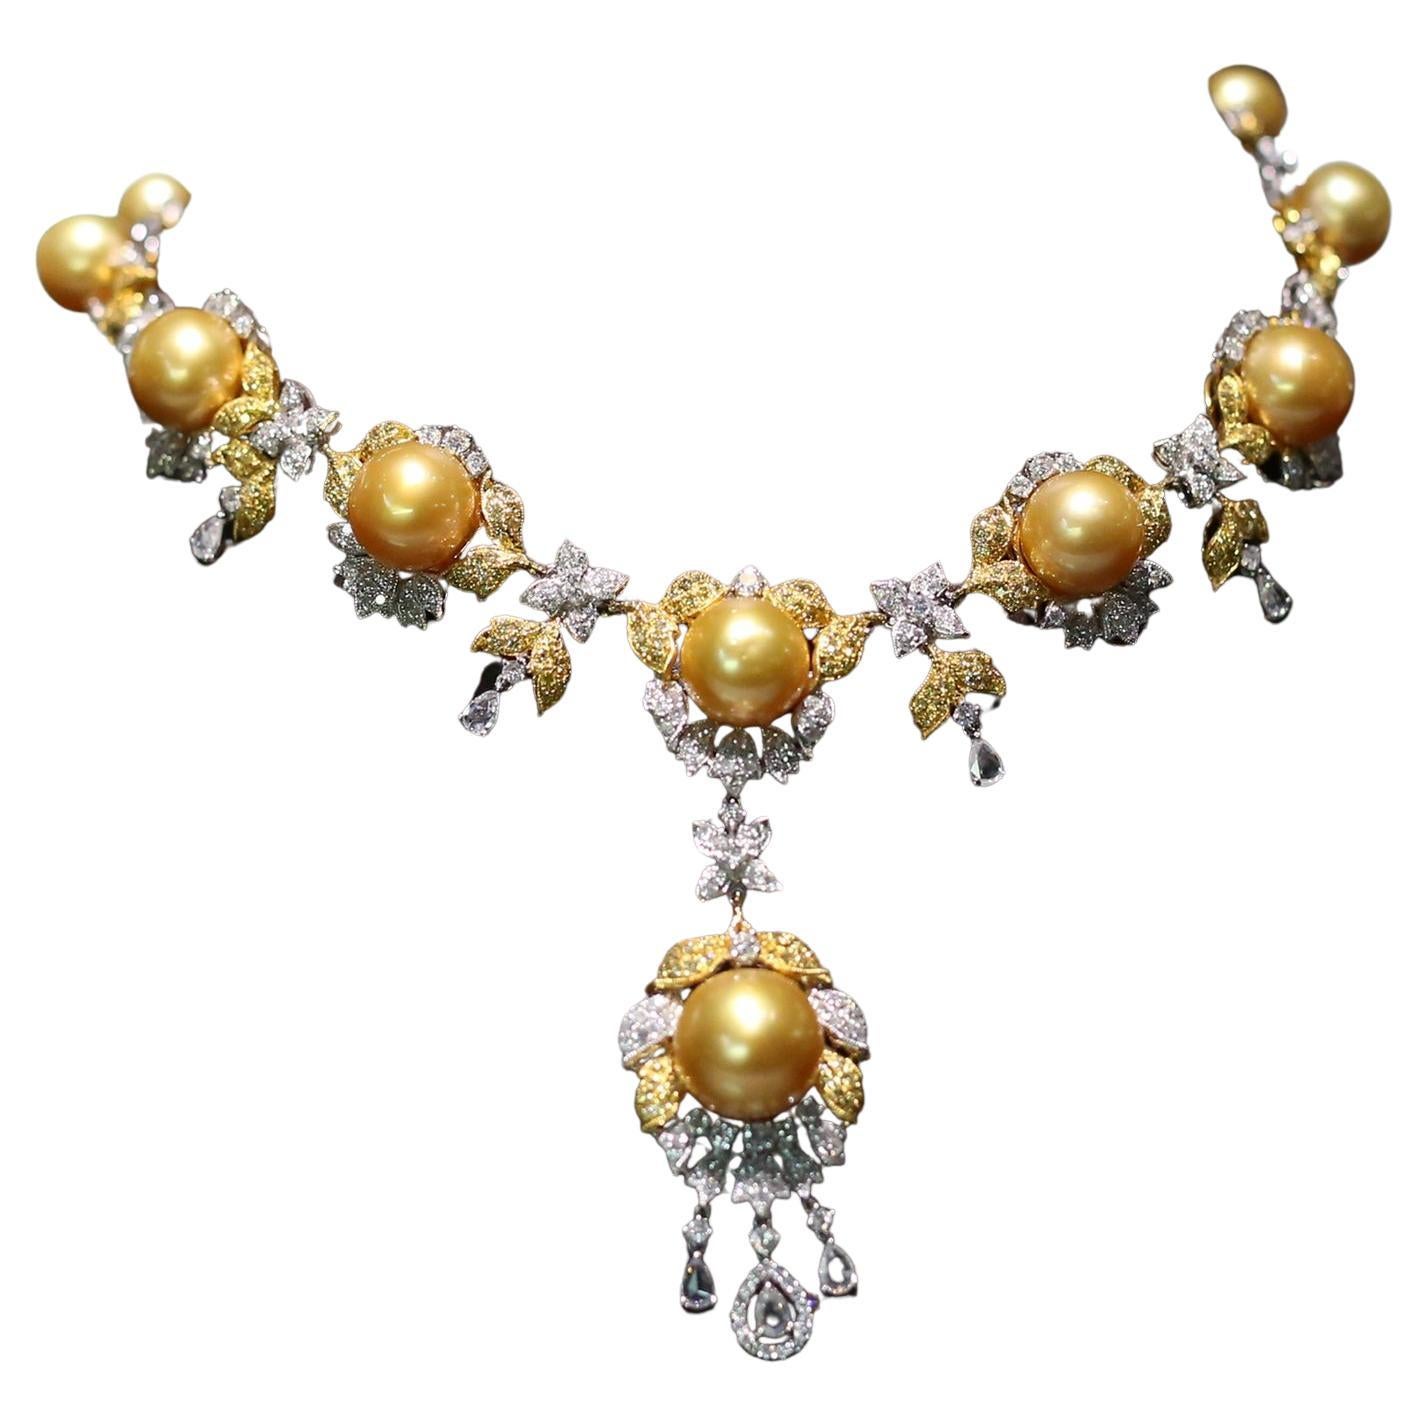 NWT $99, 000 Gorgeous 18KT South Sea Golden Pearl Fancy Yellow Diamond Necklace For Sale